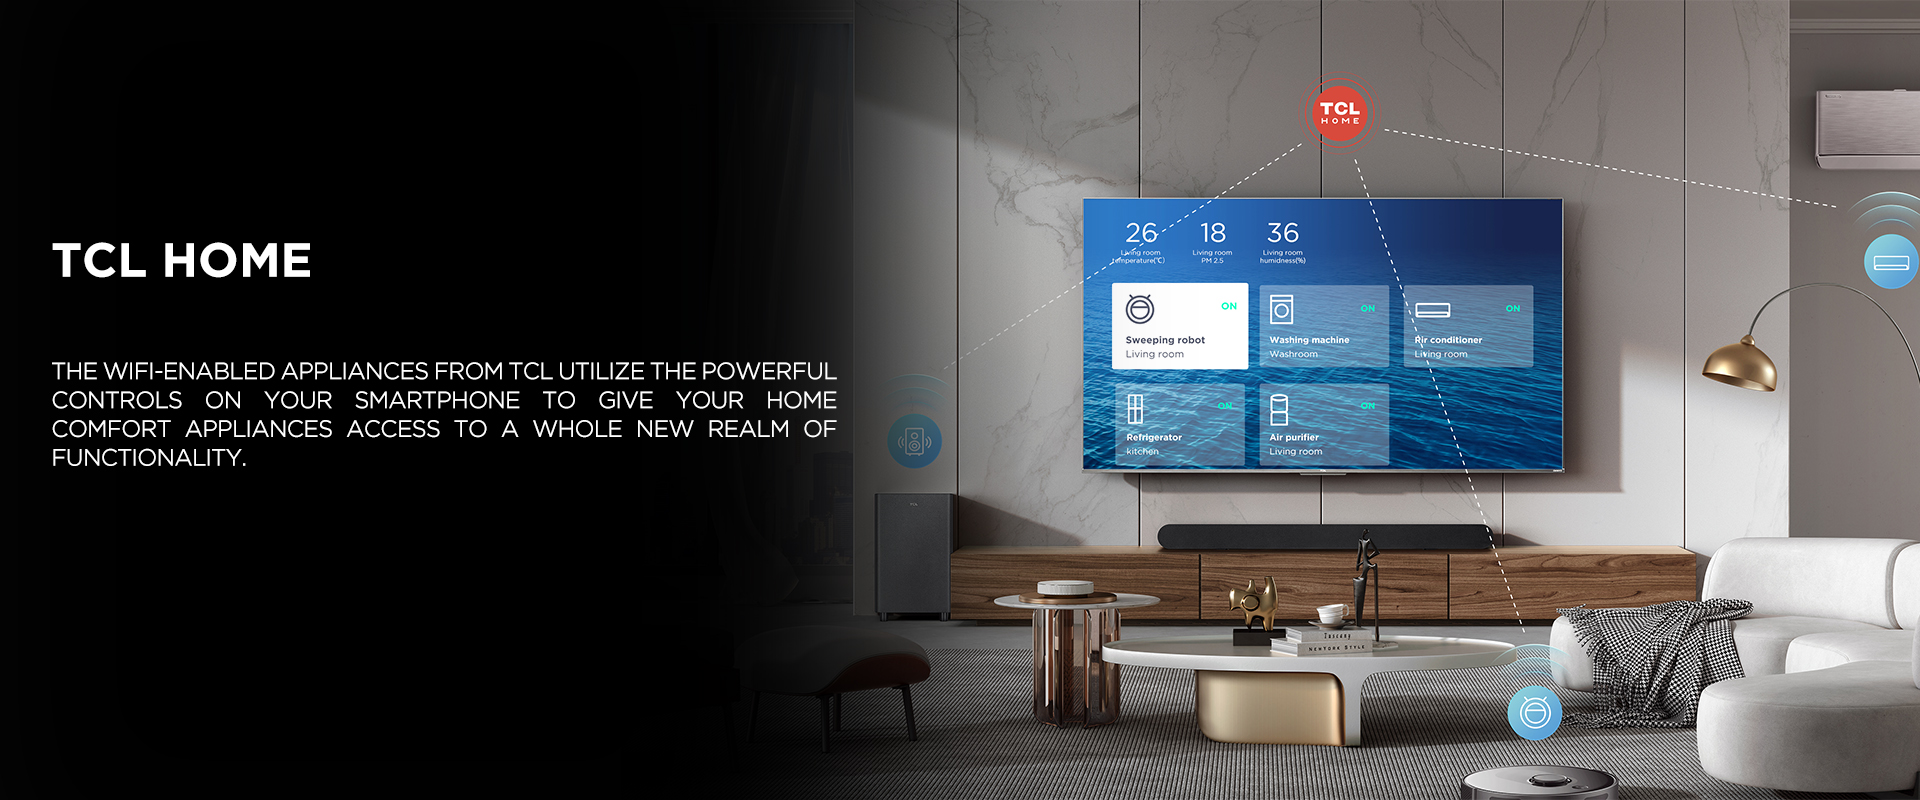 TCL HOME - The WiFi-enabled appliances from TCL utilize the powerful controls on your smartphone to give your home comfort appliances access to a whole new realm of functionality.